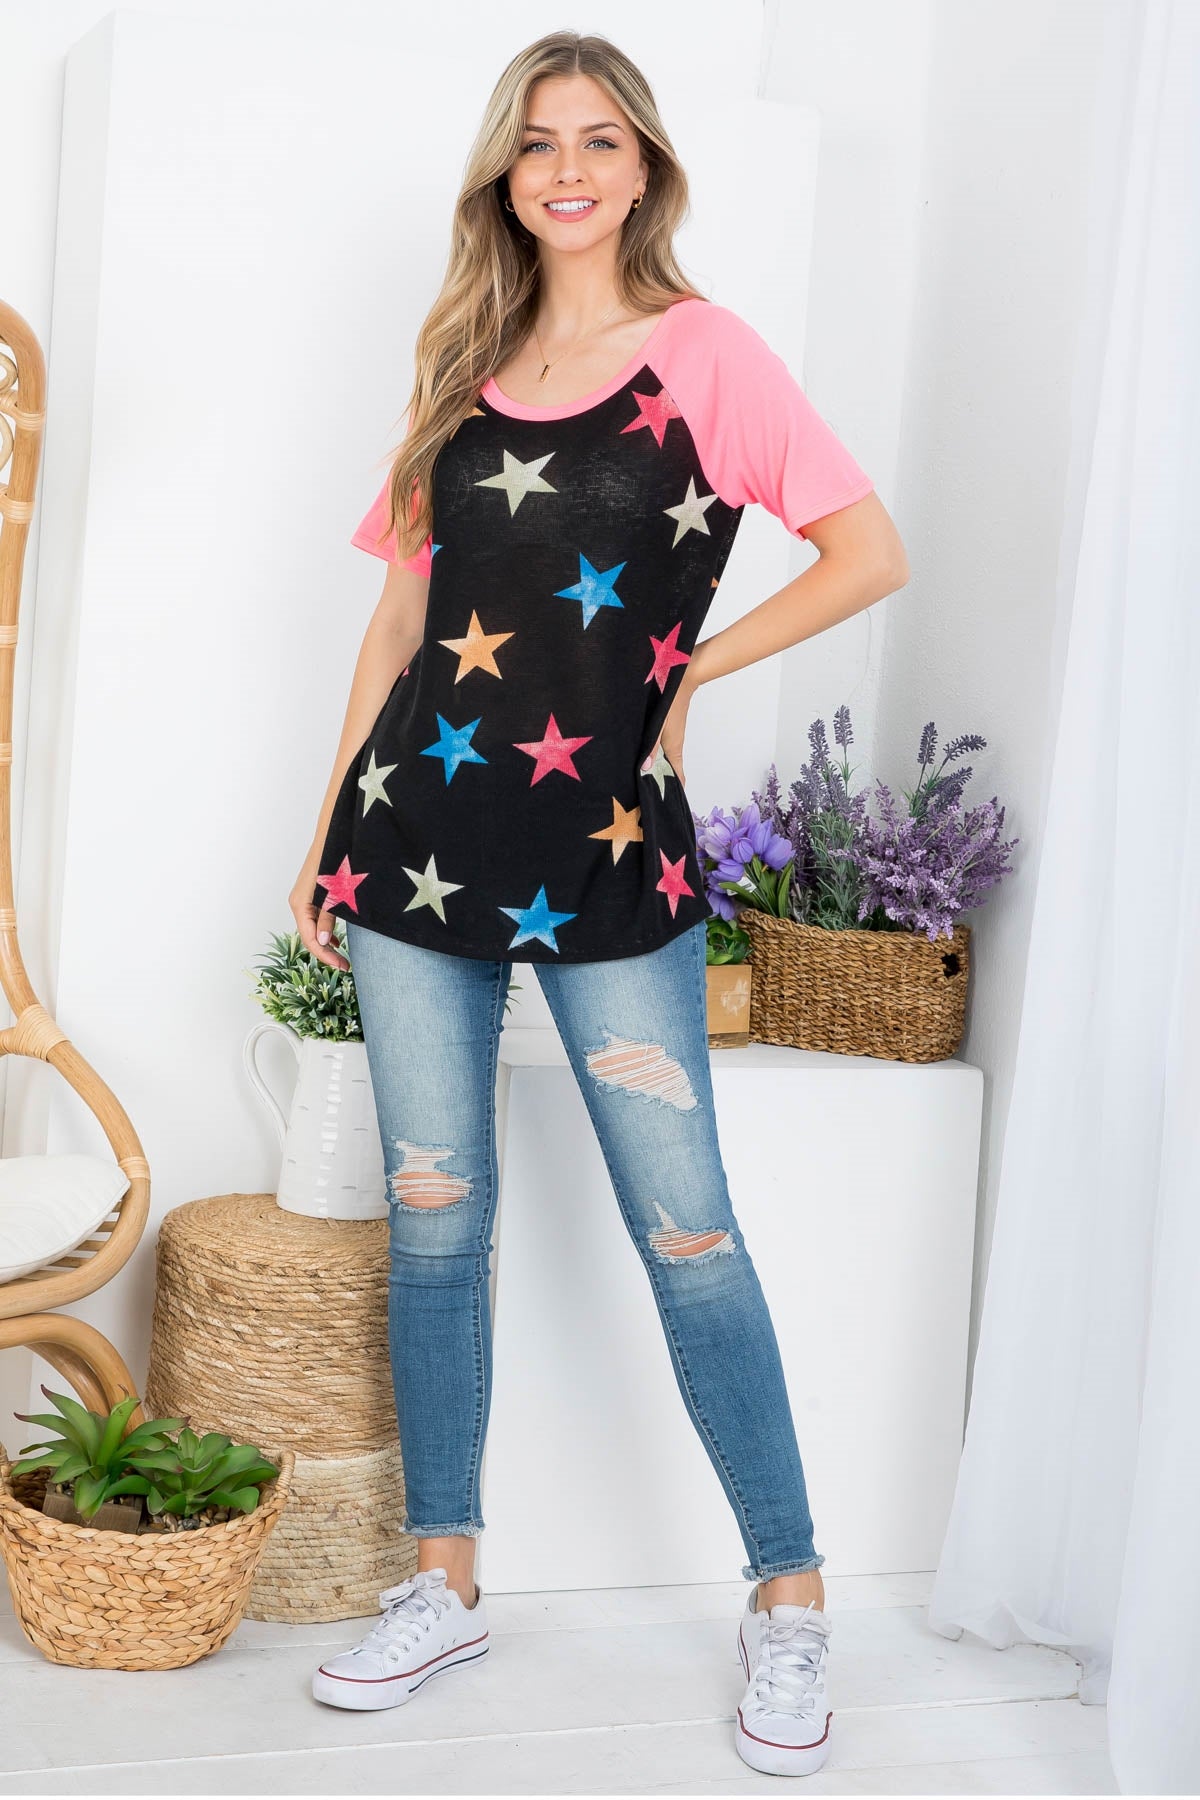 BLACK NEON PINK STAR PRINT SCOOPED NECKLINE TOP 2-2-2-2 (NOW $2.75 ONLY!)